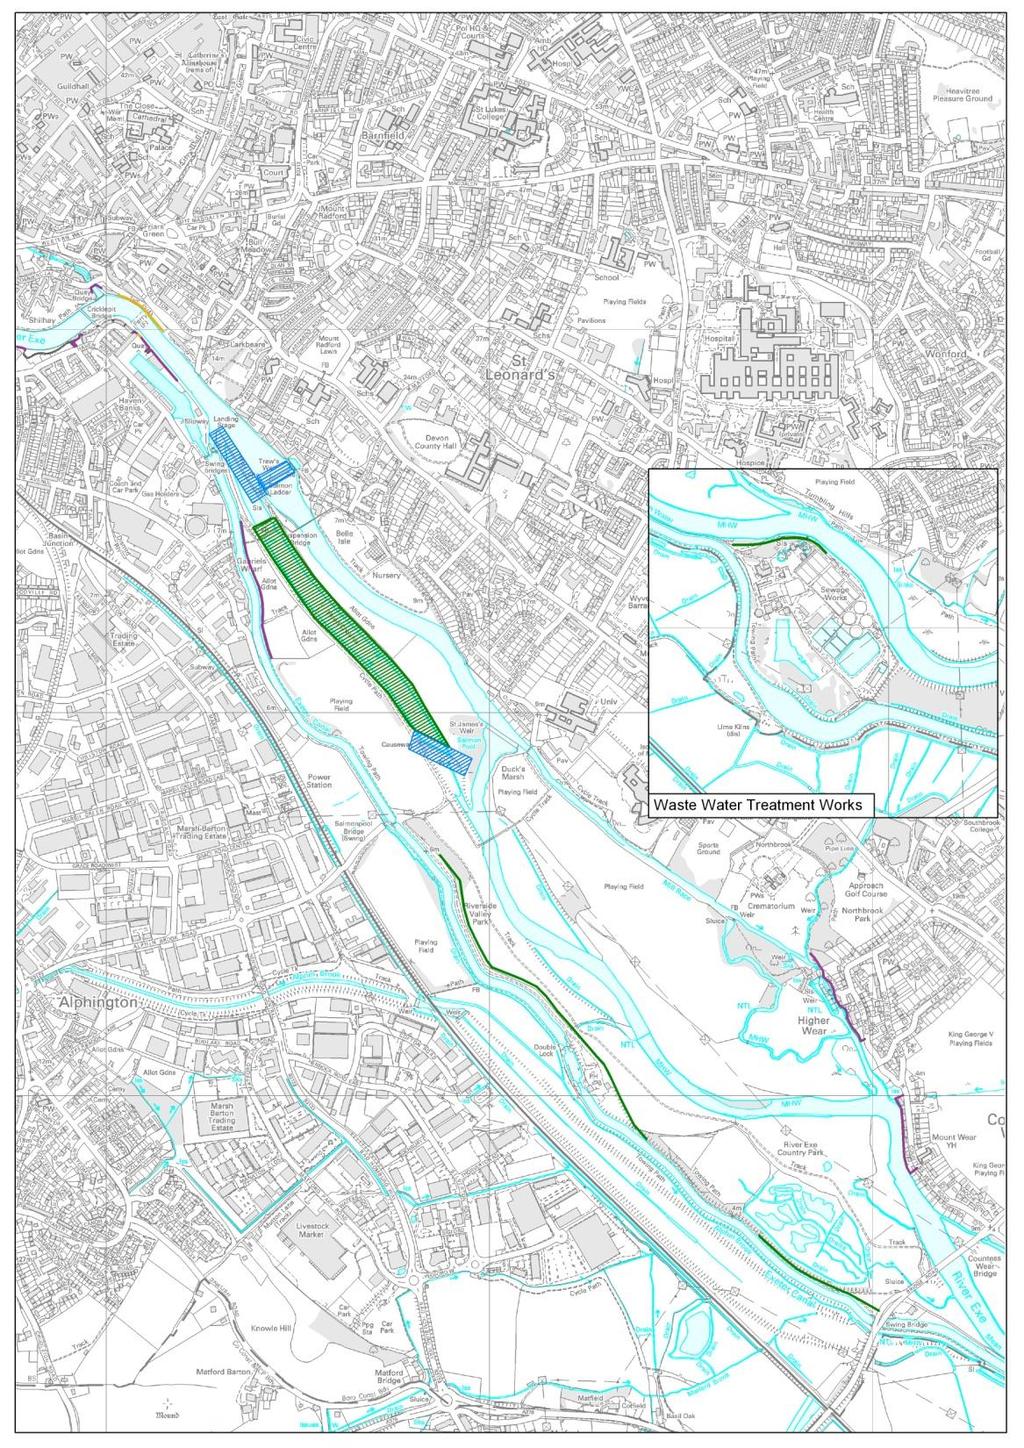 The Quay Demountable defences Trews Side Weir crest modifications Countess Wear Sewage Treatment Works SWW defence embankments Phase 2 Will raise standard of flood protection from 1/40 annual risk to